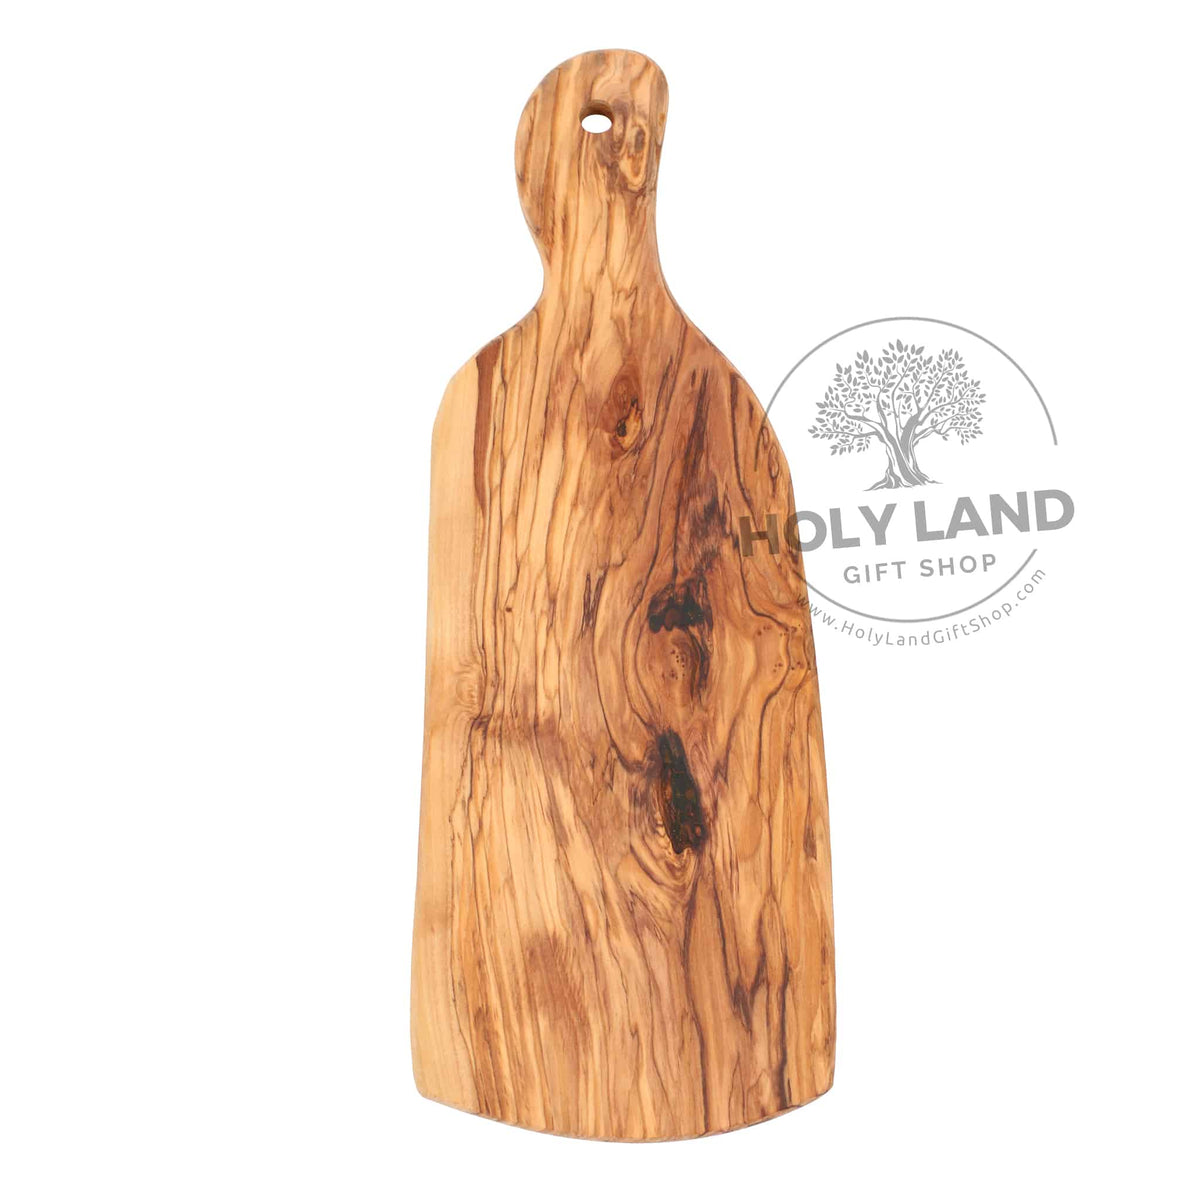 Olive Wood Cutting Board Hand Crafted Jerusalem - Holy Land Gift Shop